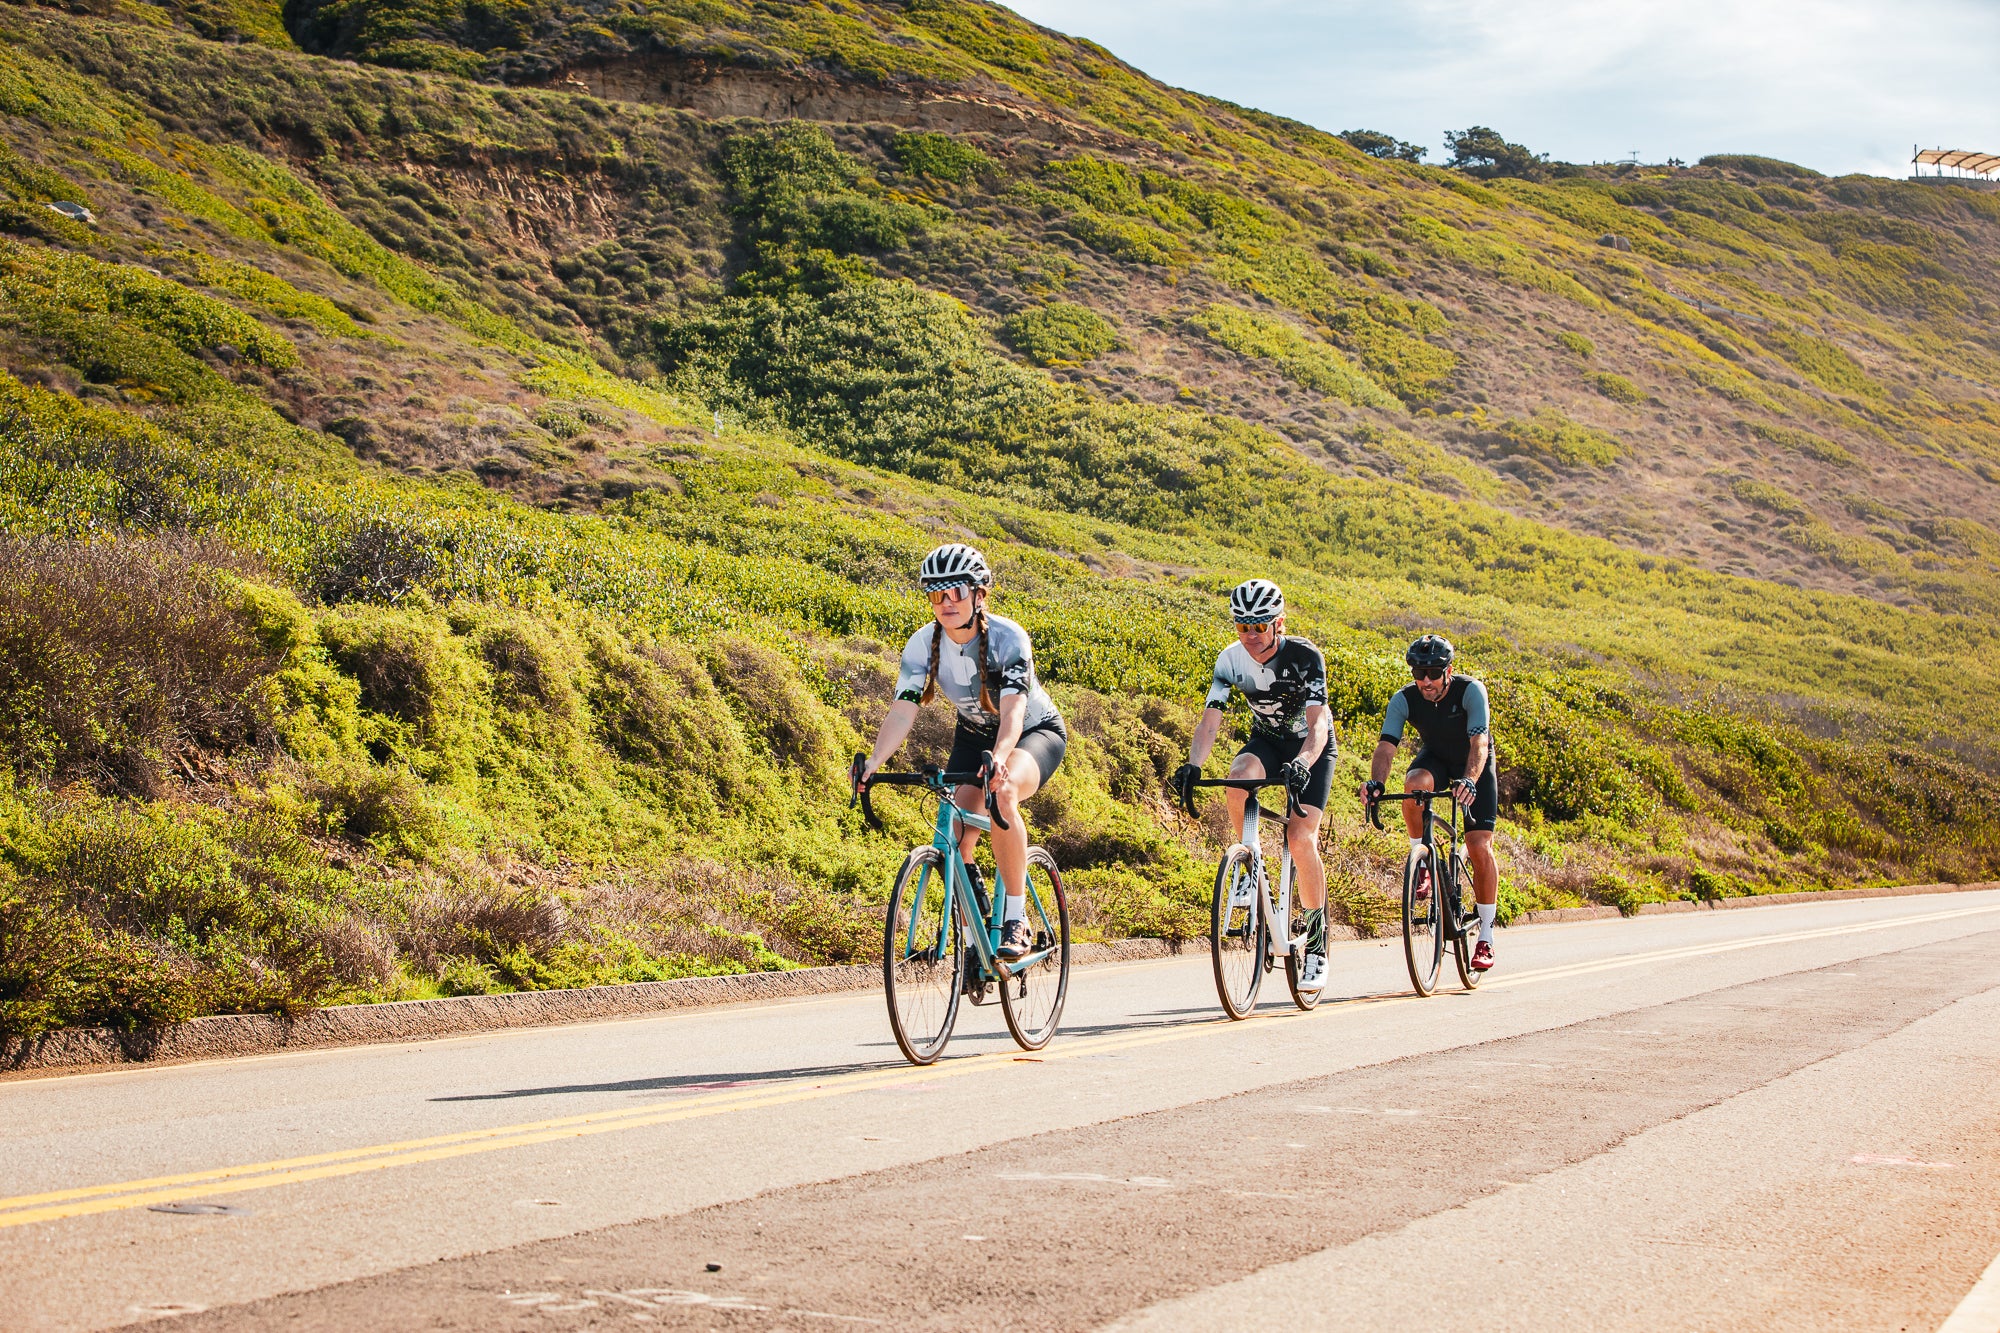 Three cyclists riding down a remote road past a tall grassy hill